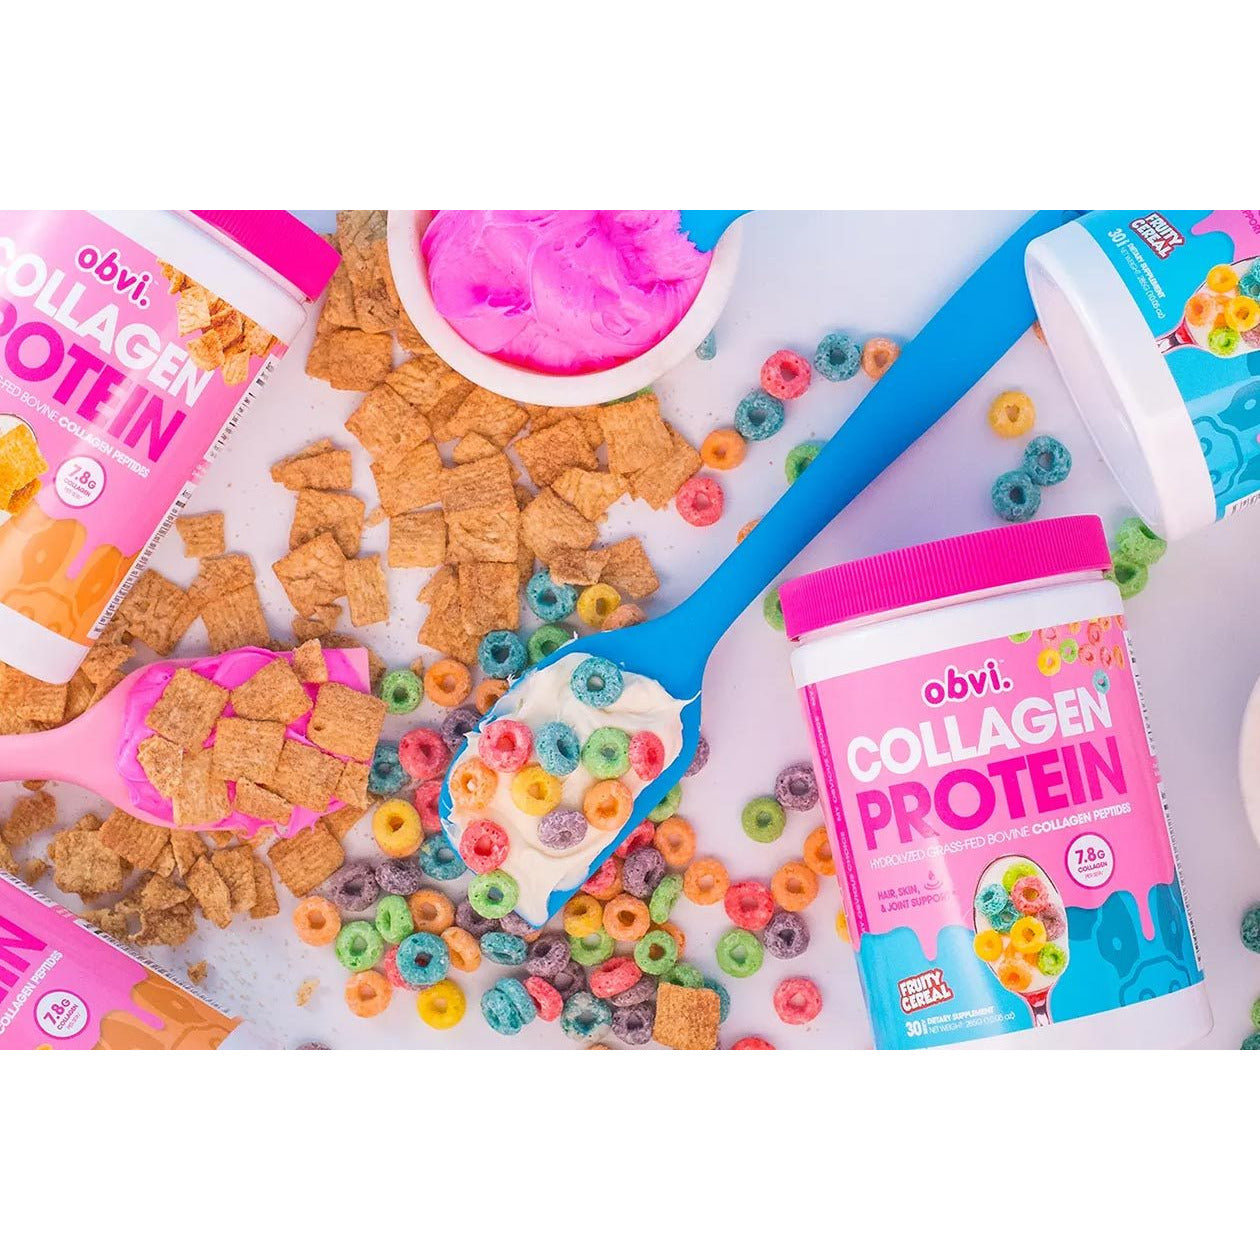 Obvi Flavoured Collagen Protein (30 servings) collagen Fruity Cereal BEST BY 03/23,Cinna Cereal,Cocoa Cereal  BEST BY 03/23,Frosted Cereal,Honey O's BEST BY 03/2022,LIMITED EDITION! Birthday Cupcakes BEST BY 06/2022,LIMITED EDITION Pumpkin Spice Latte,LIMITED EDITION! Pink Velvet,Marshmallow Cereal BEST BY 03/23,Peanut Butter Cups BEST BY 05/23 OBVI